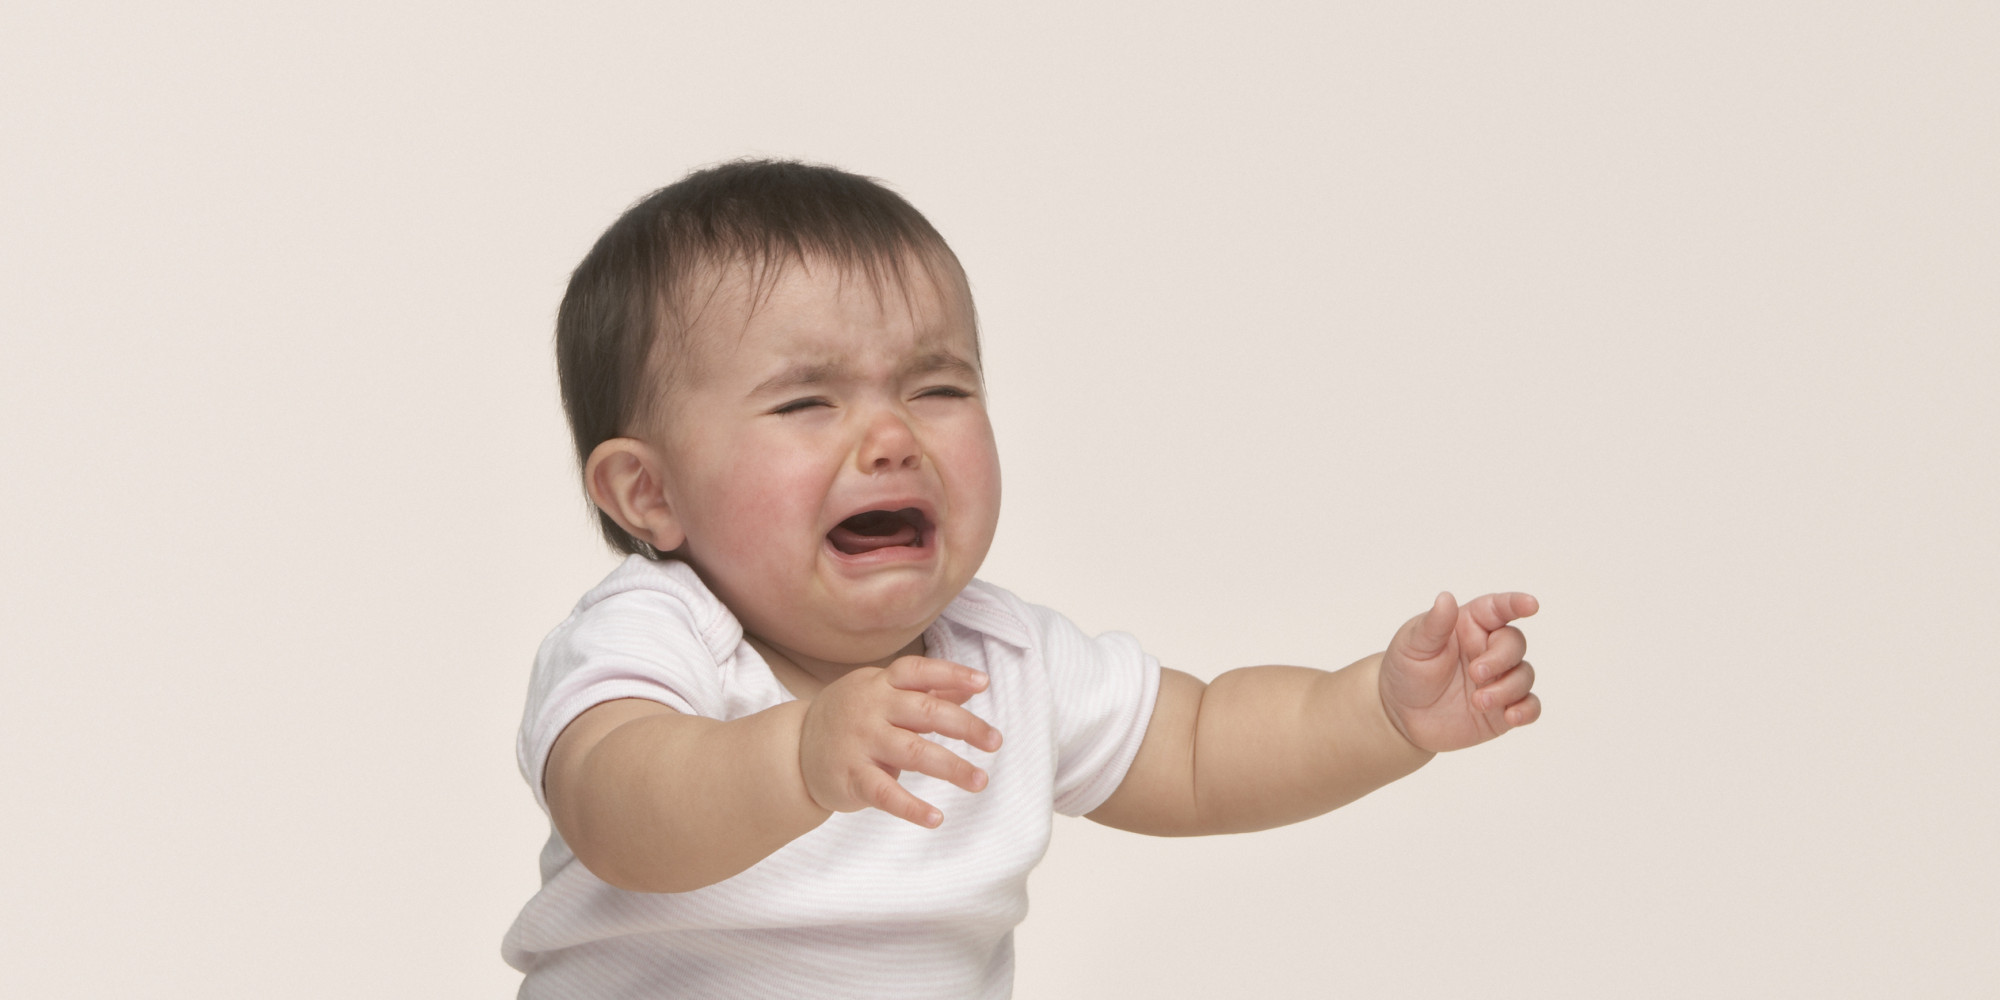 Don't Act Like You Don't Hear The Baby Crying! | HuffPost